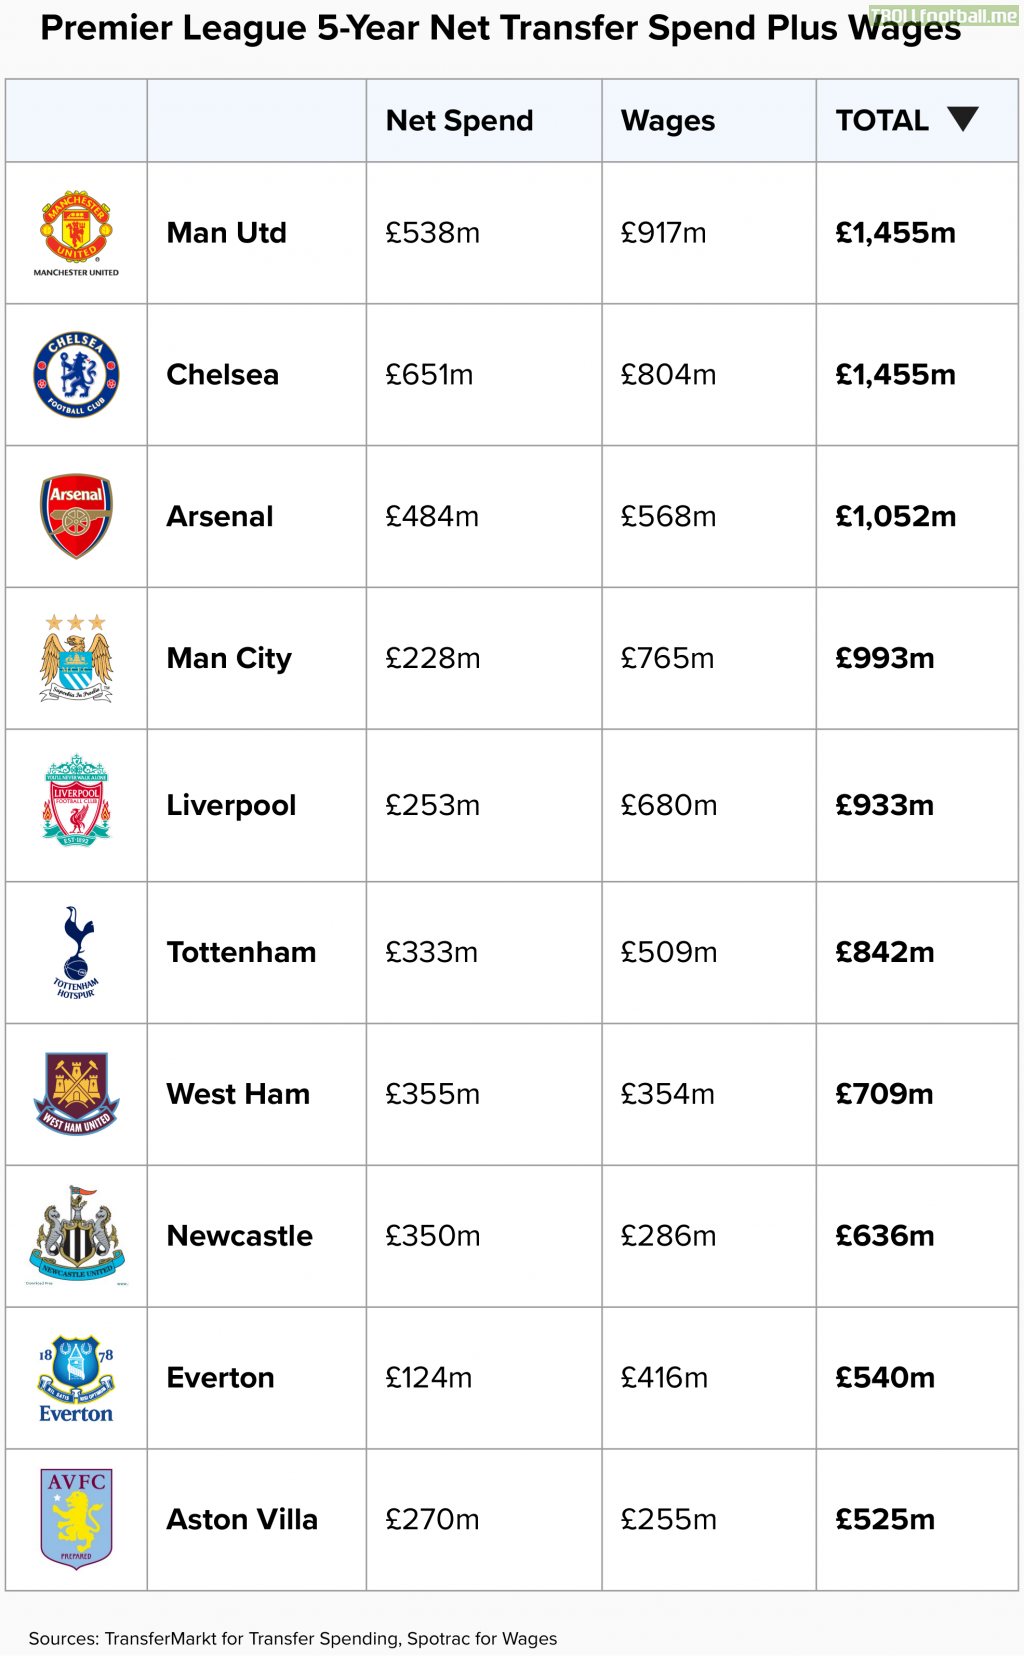 Premier League 5-Year Net Transfer Spend Plus Wages: The Top 10.